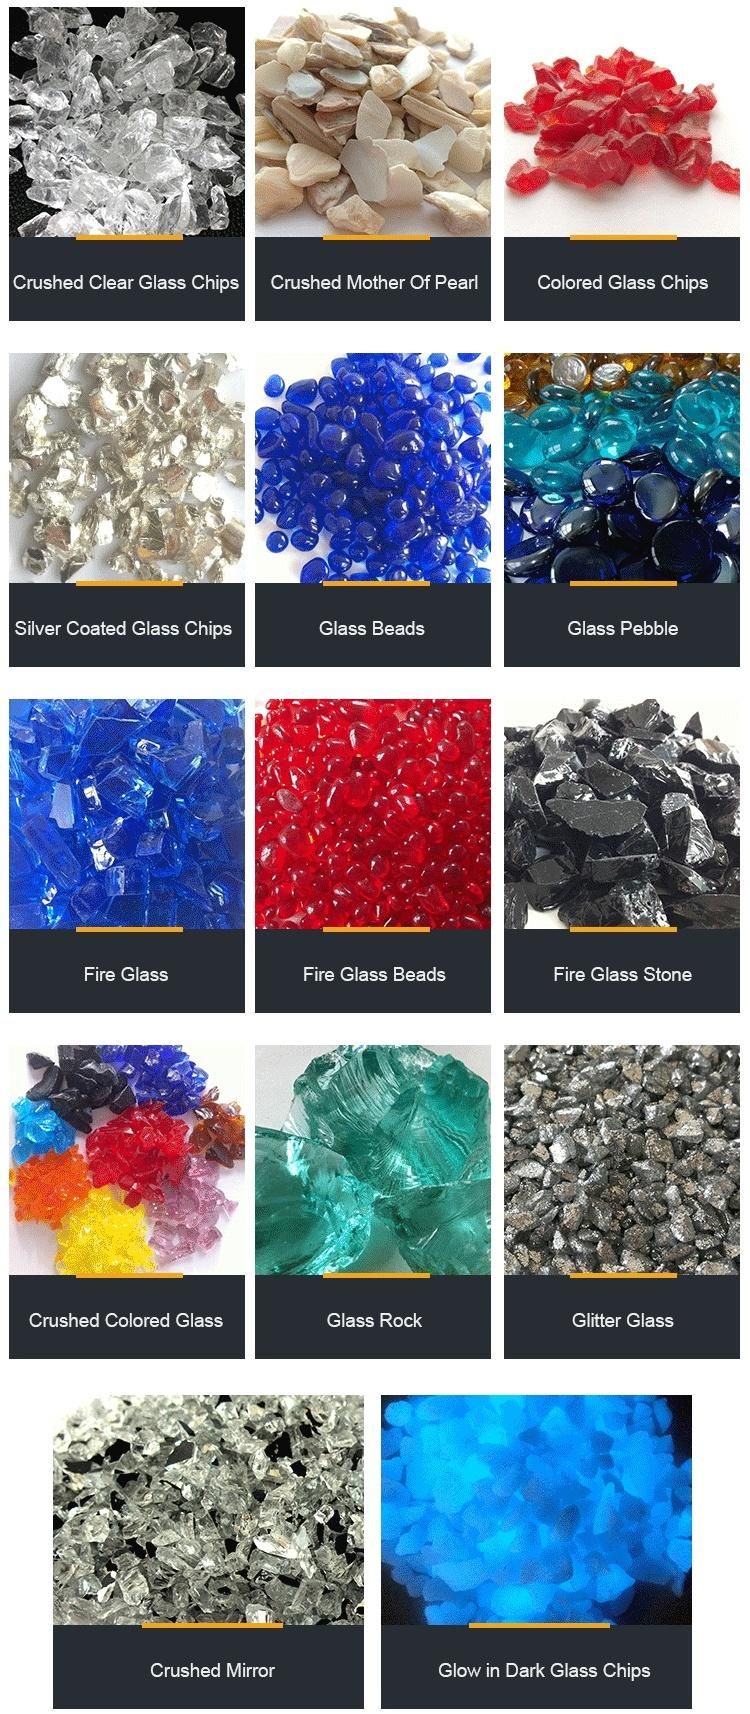 Colorful Decorative Broken Crushed Colored Glass Grit